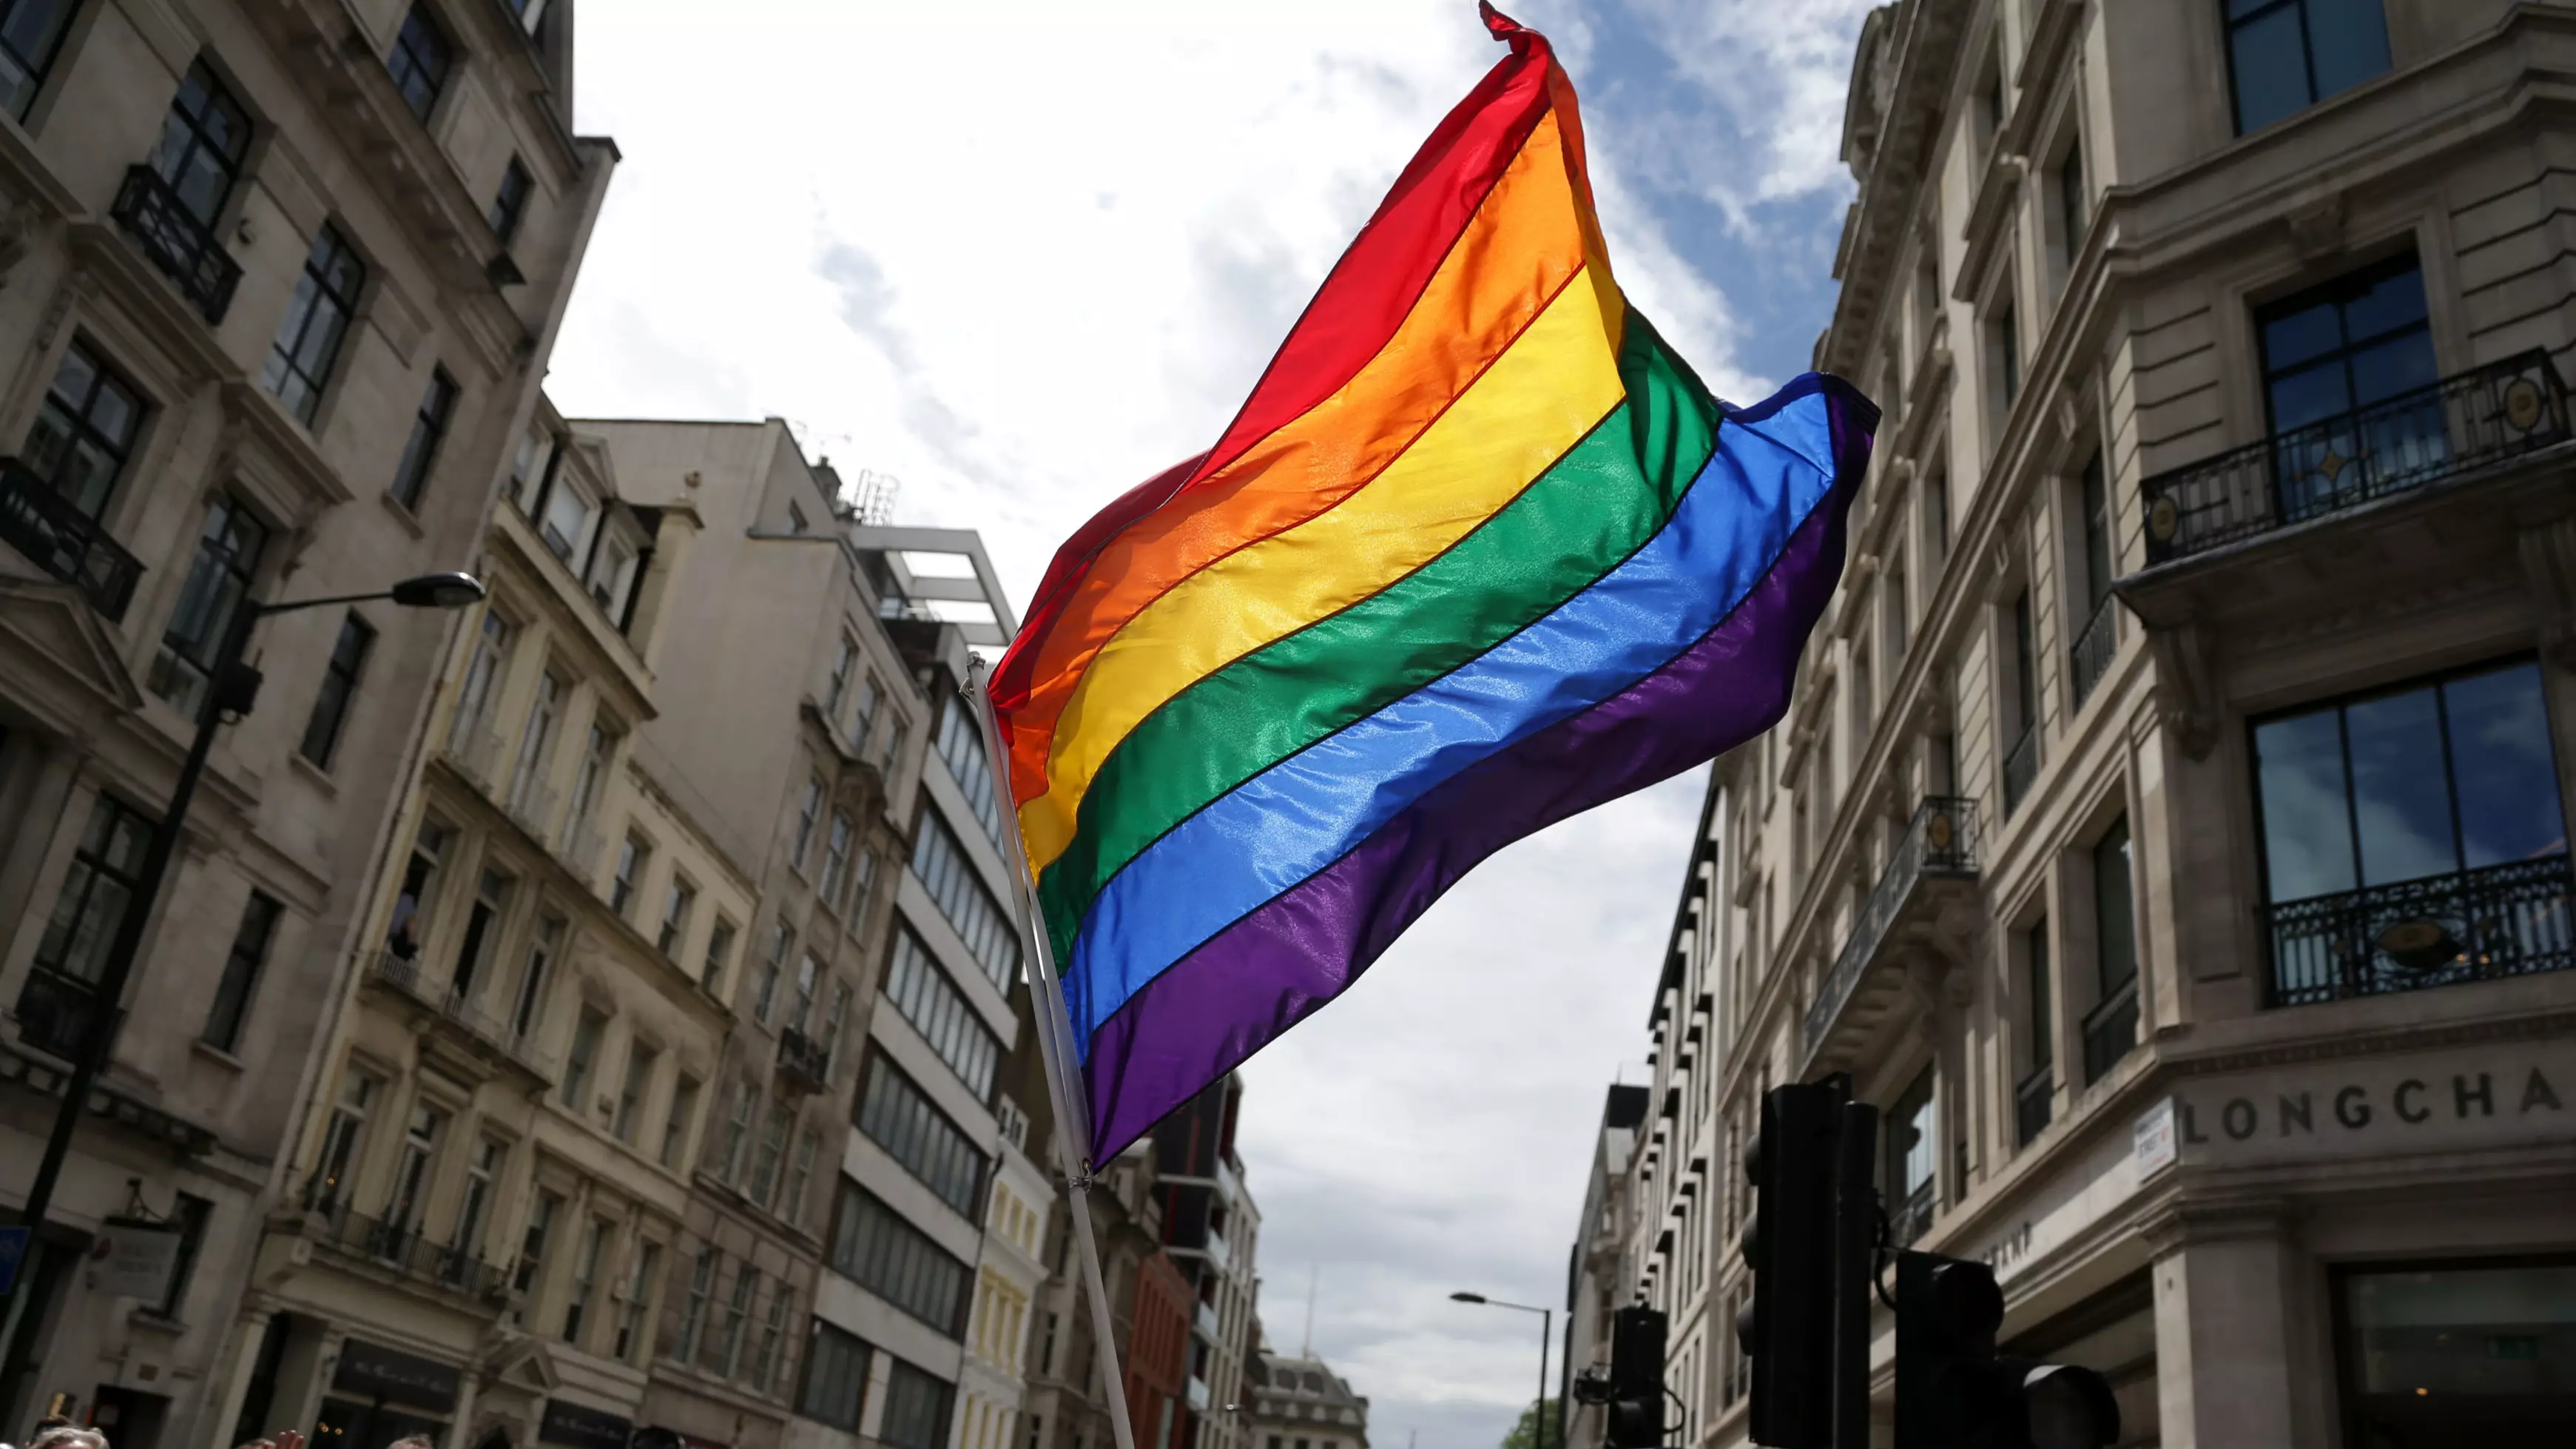 Planning Underway To Hold Straight Pride Parade In America